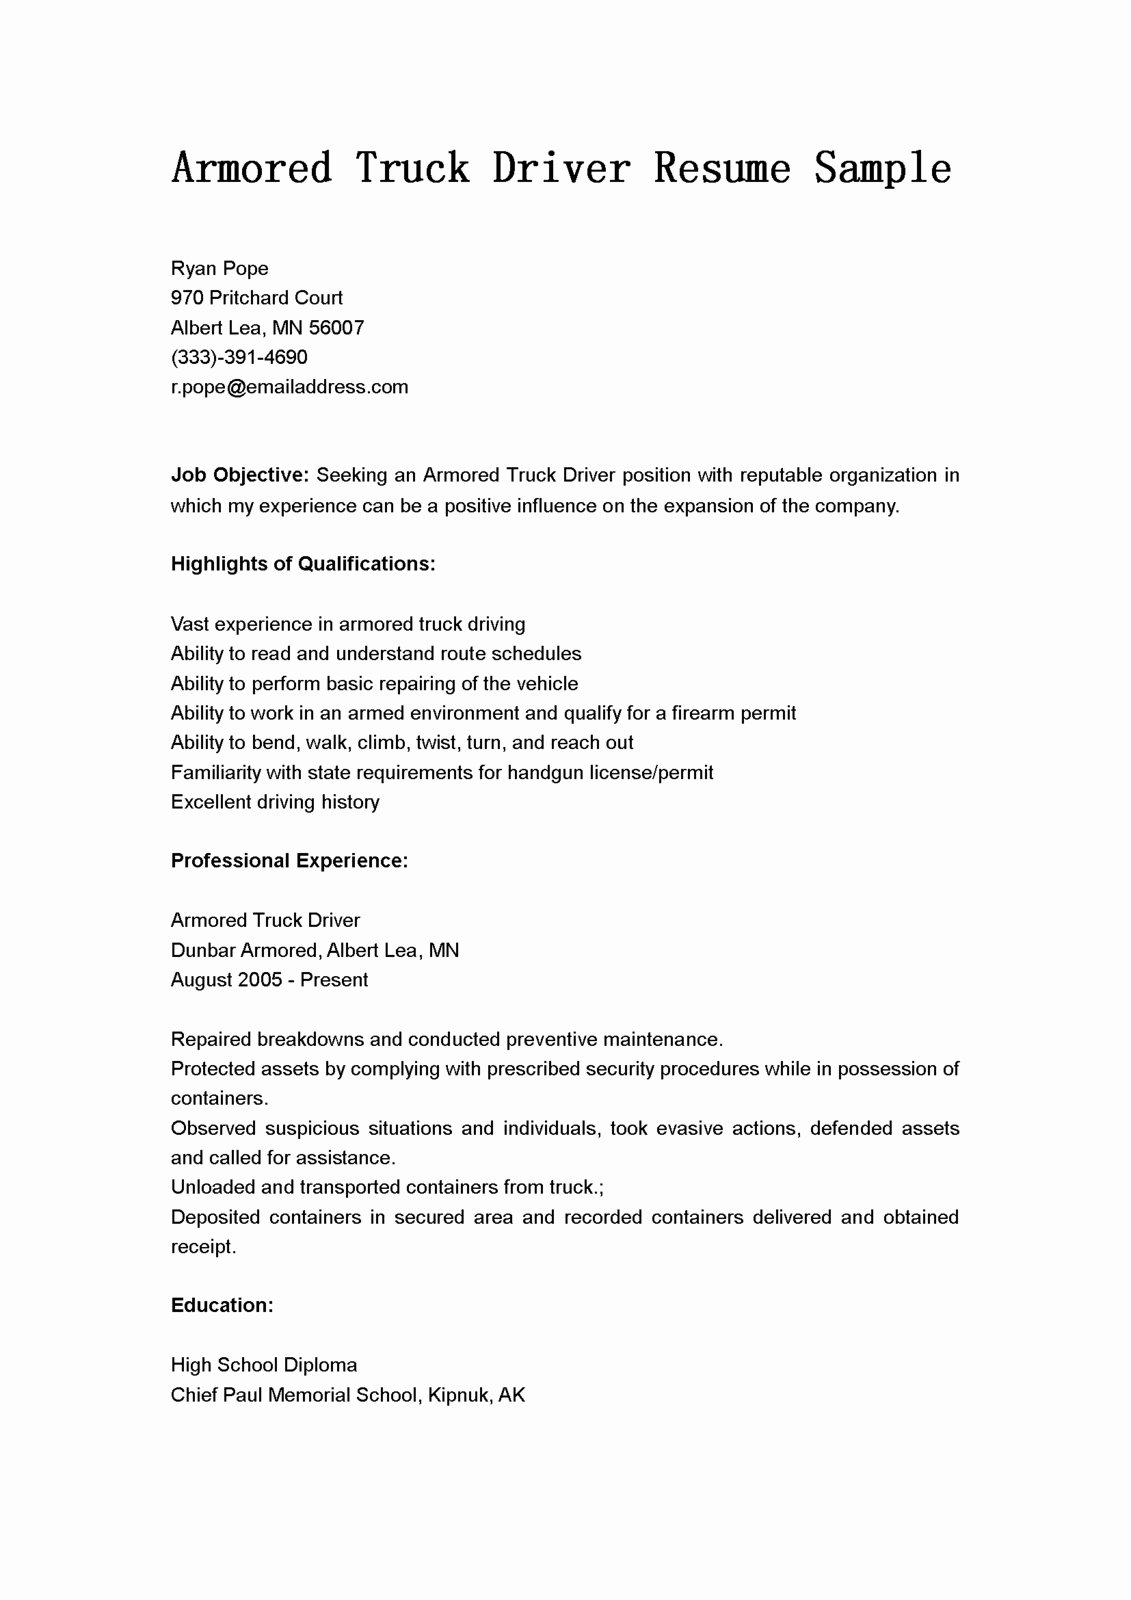 Driver Resumes Armored Truck Driver Resume Sample